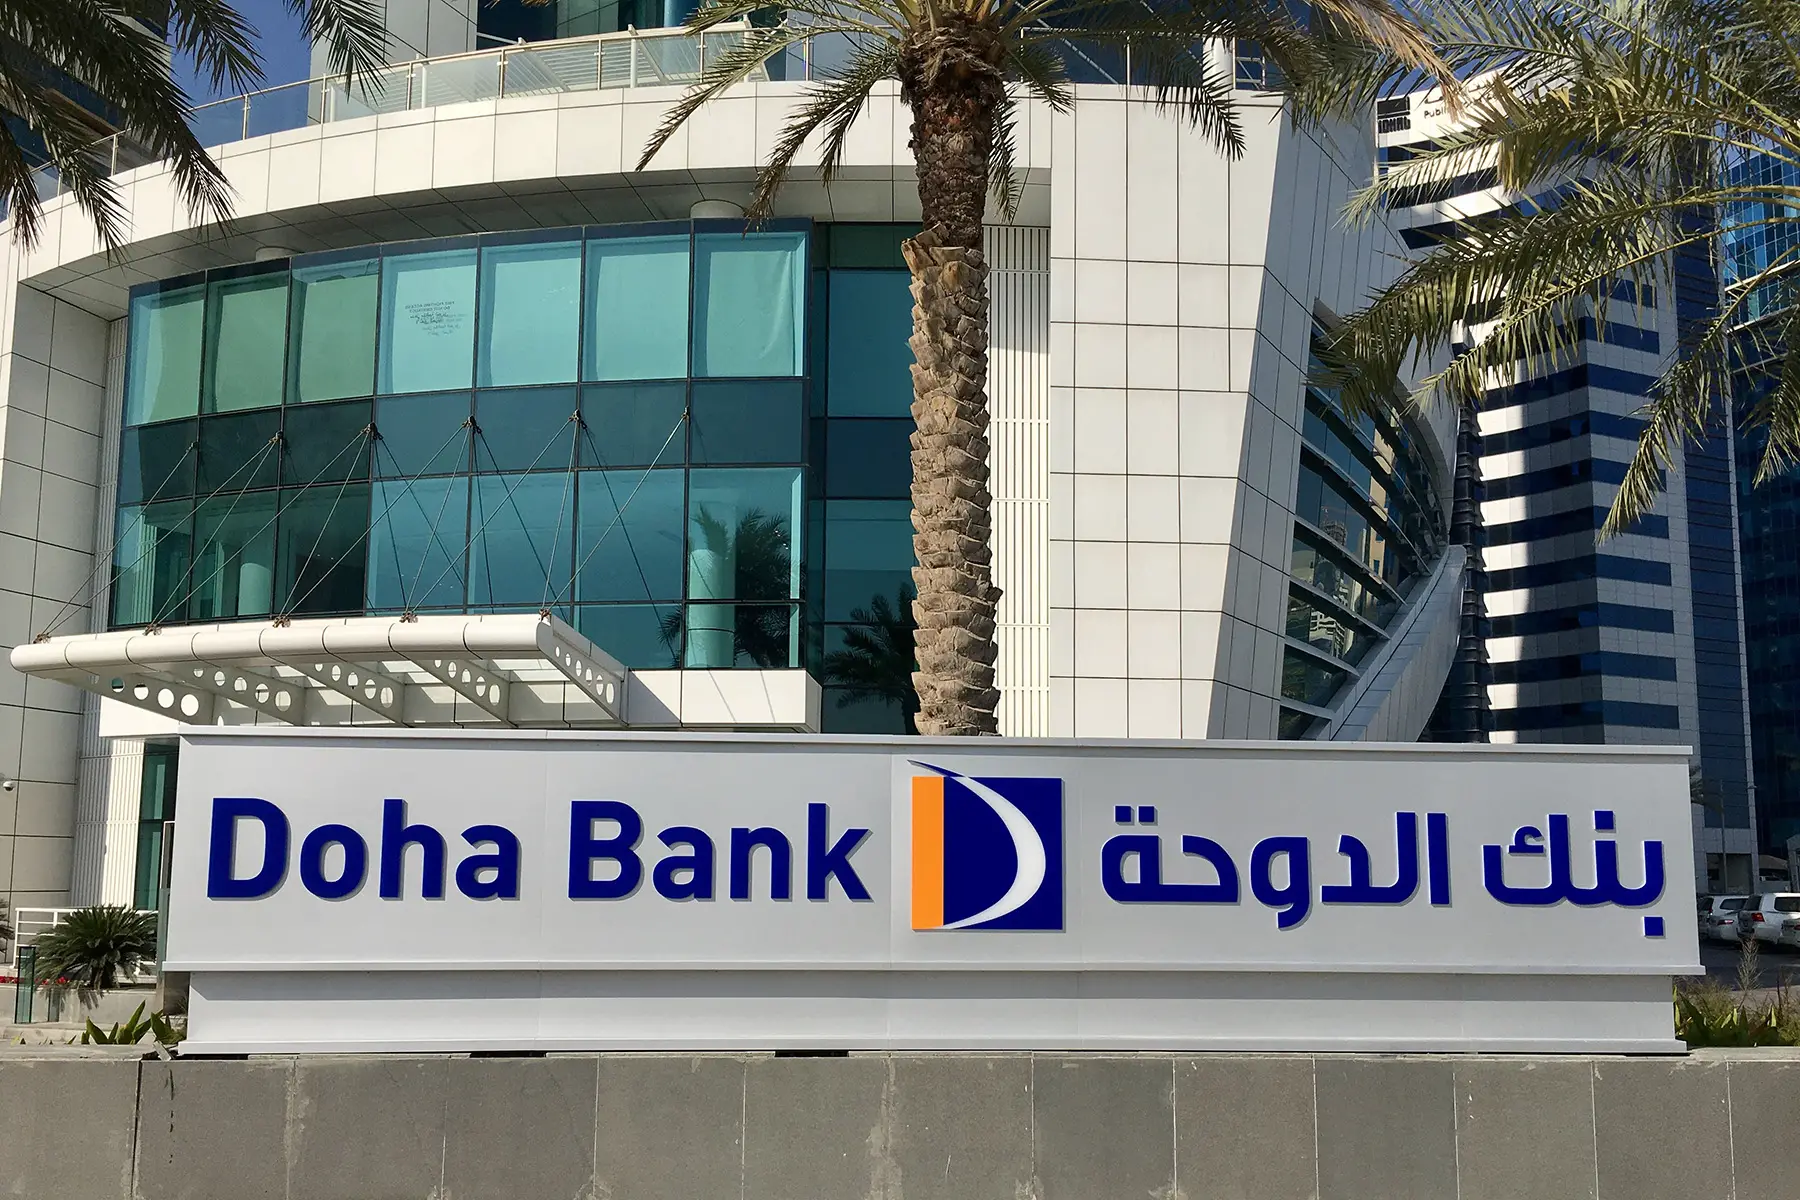 The offices of Doha Bank